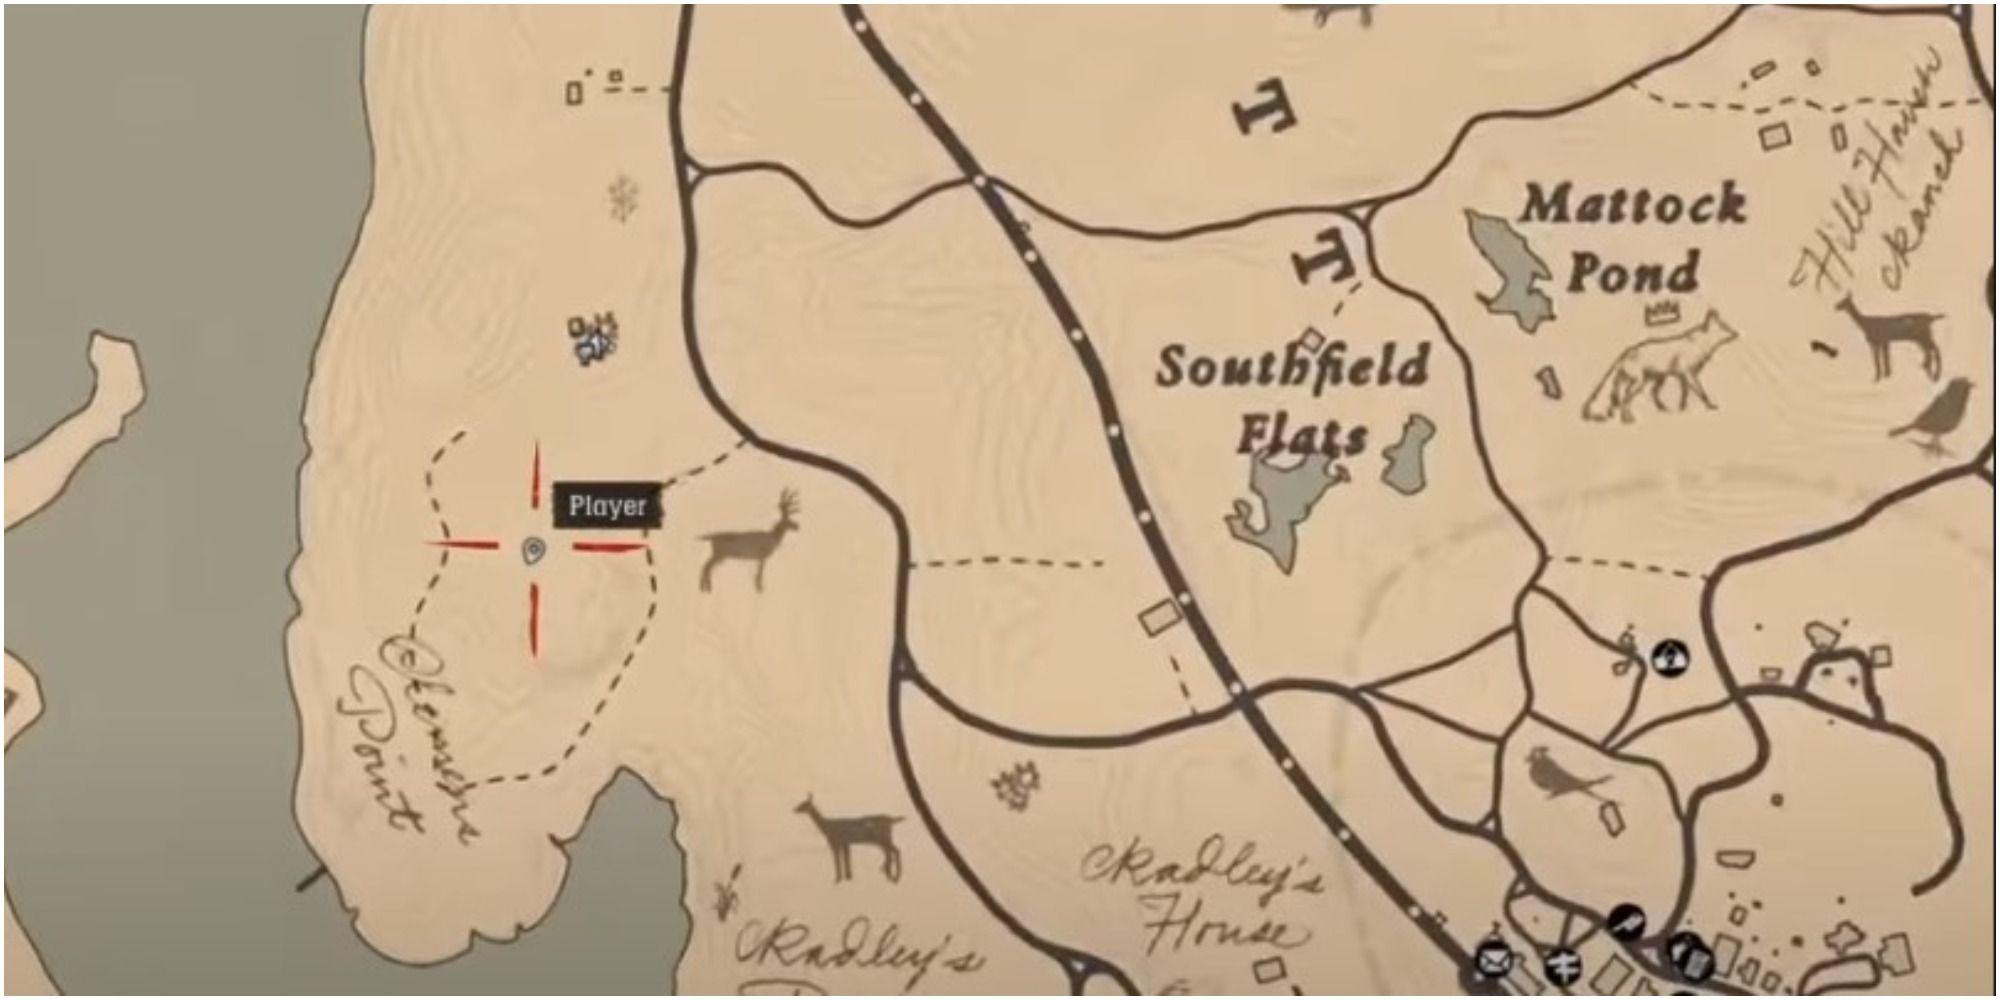 Red Dead Redemption 2 Regular American Ginseng Spawning Point